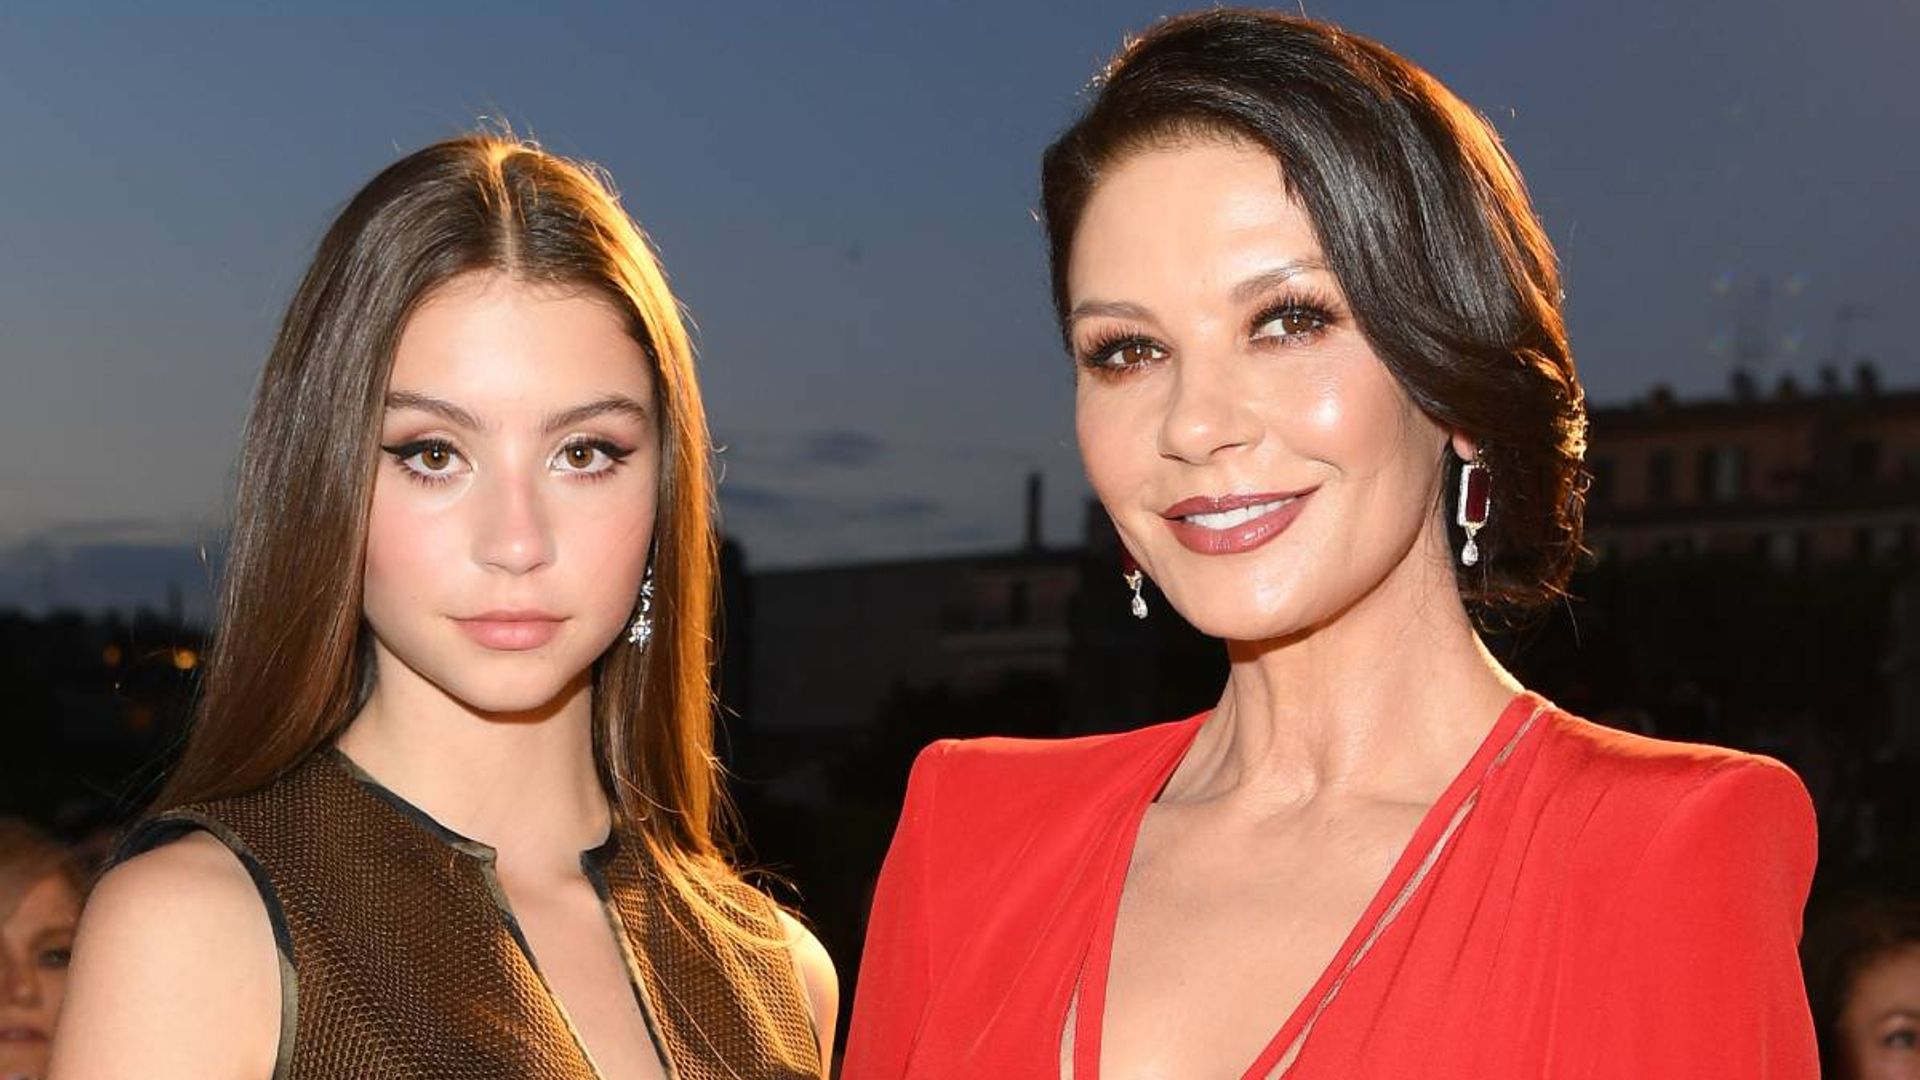 Catherine Zeta-Jones’ daughter Carys looks so grown up as she discusses